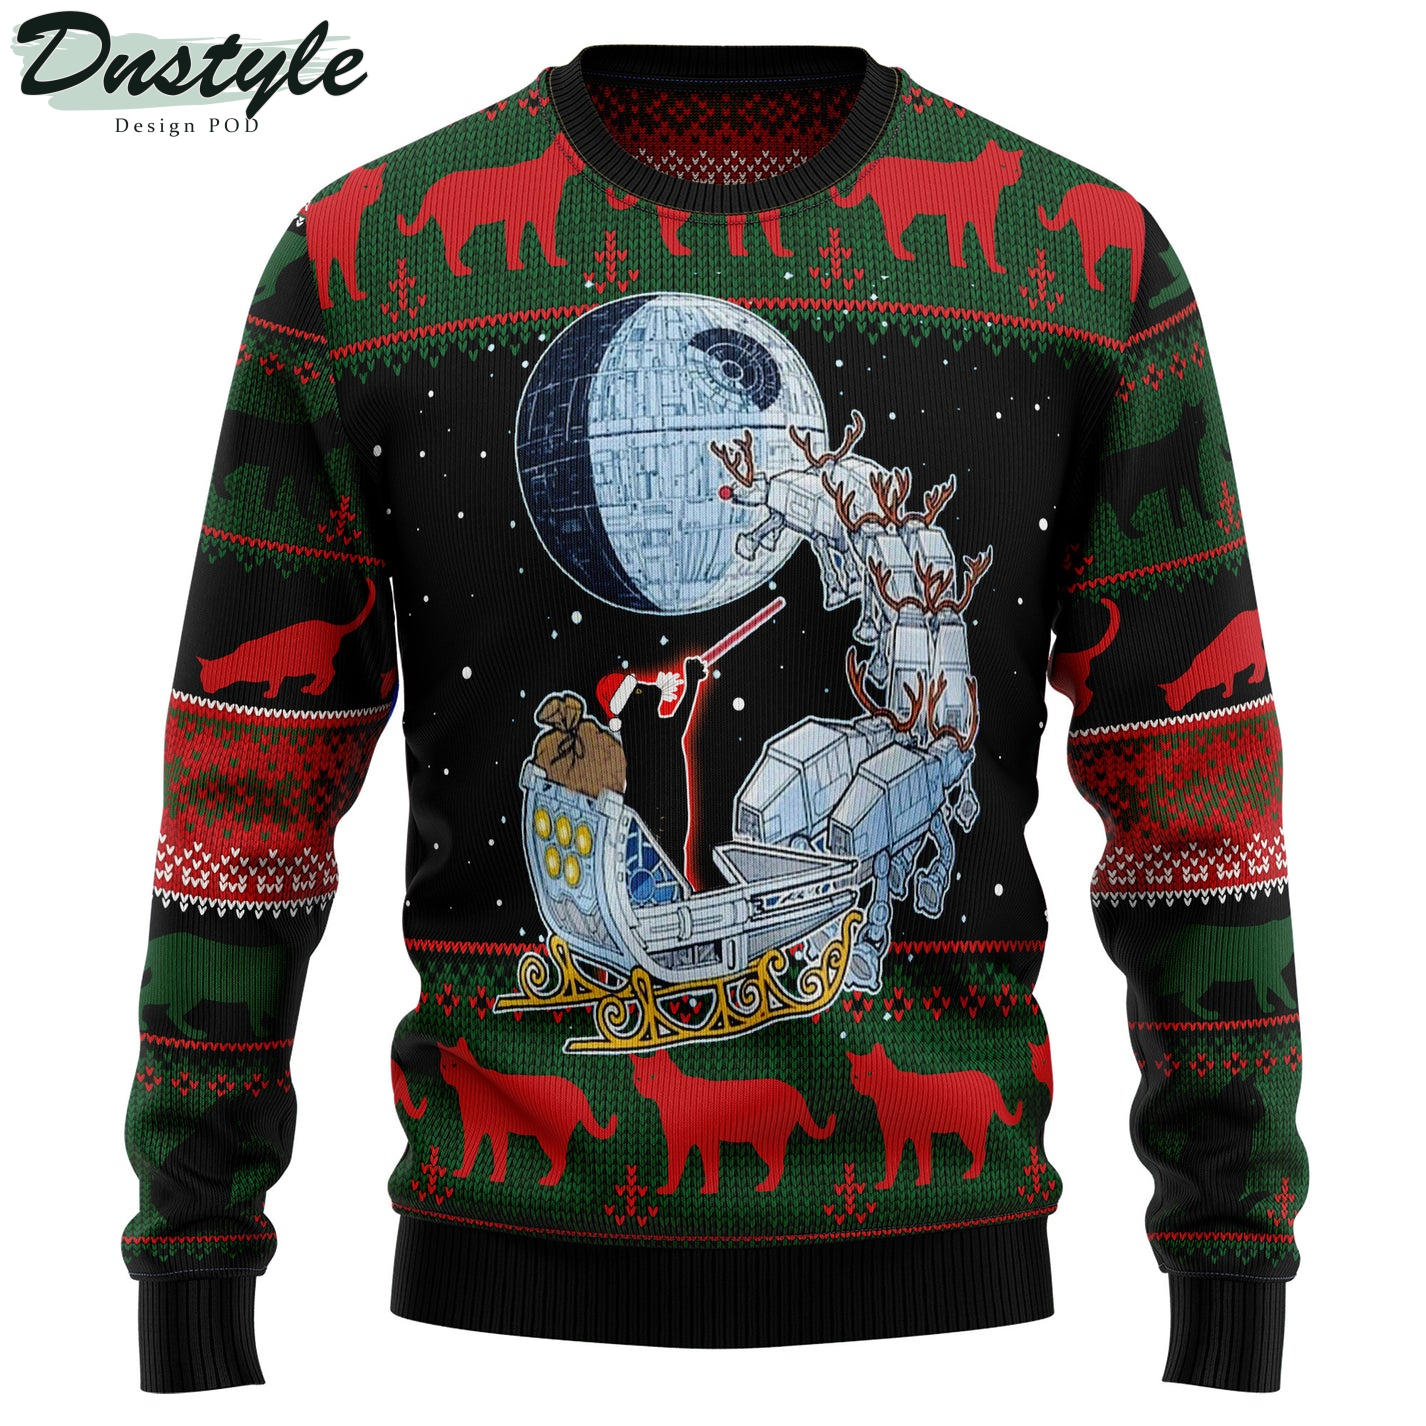 Black Cat Sleigh To Death Star Ugly Christmas Sweater